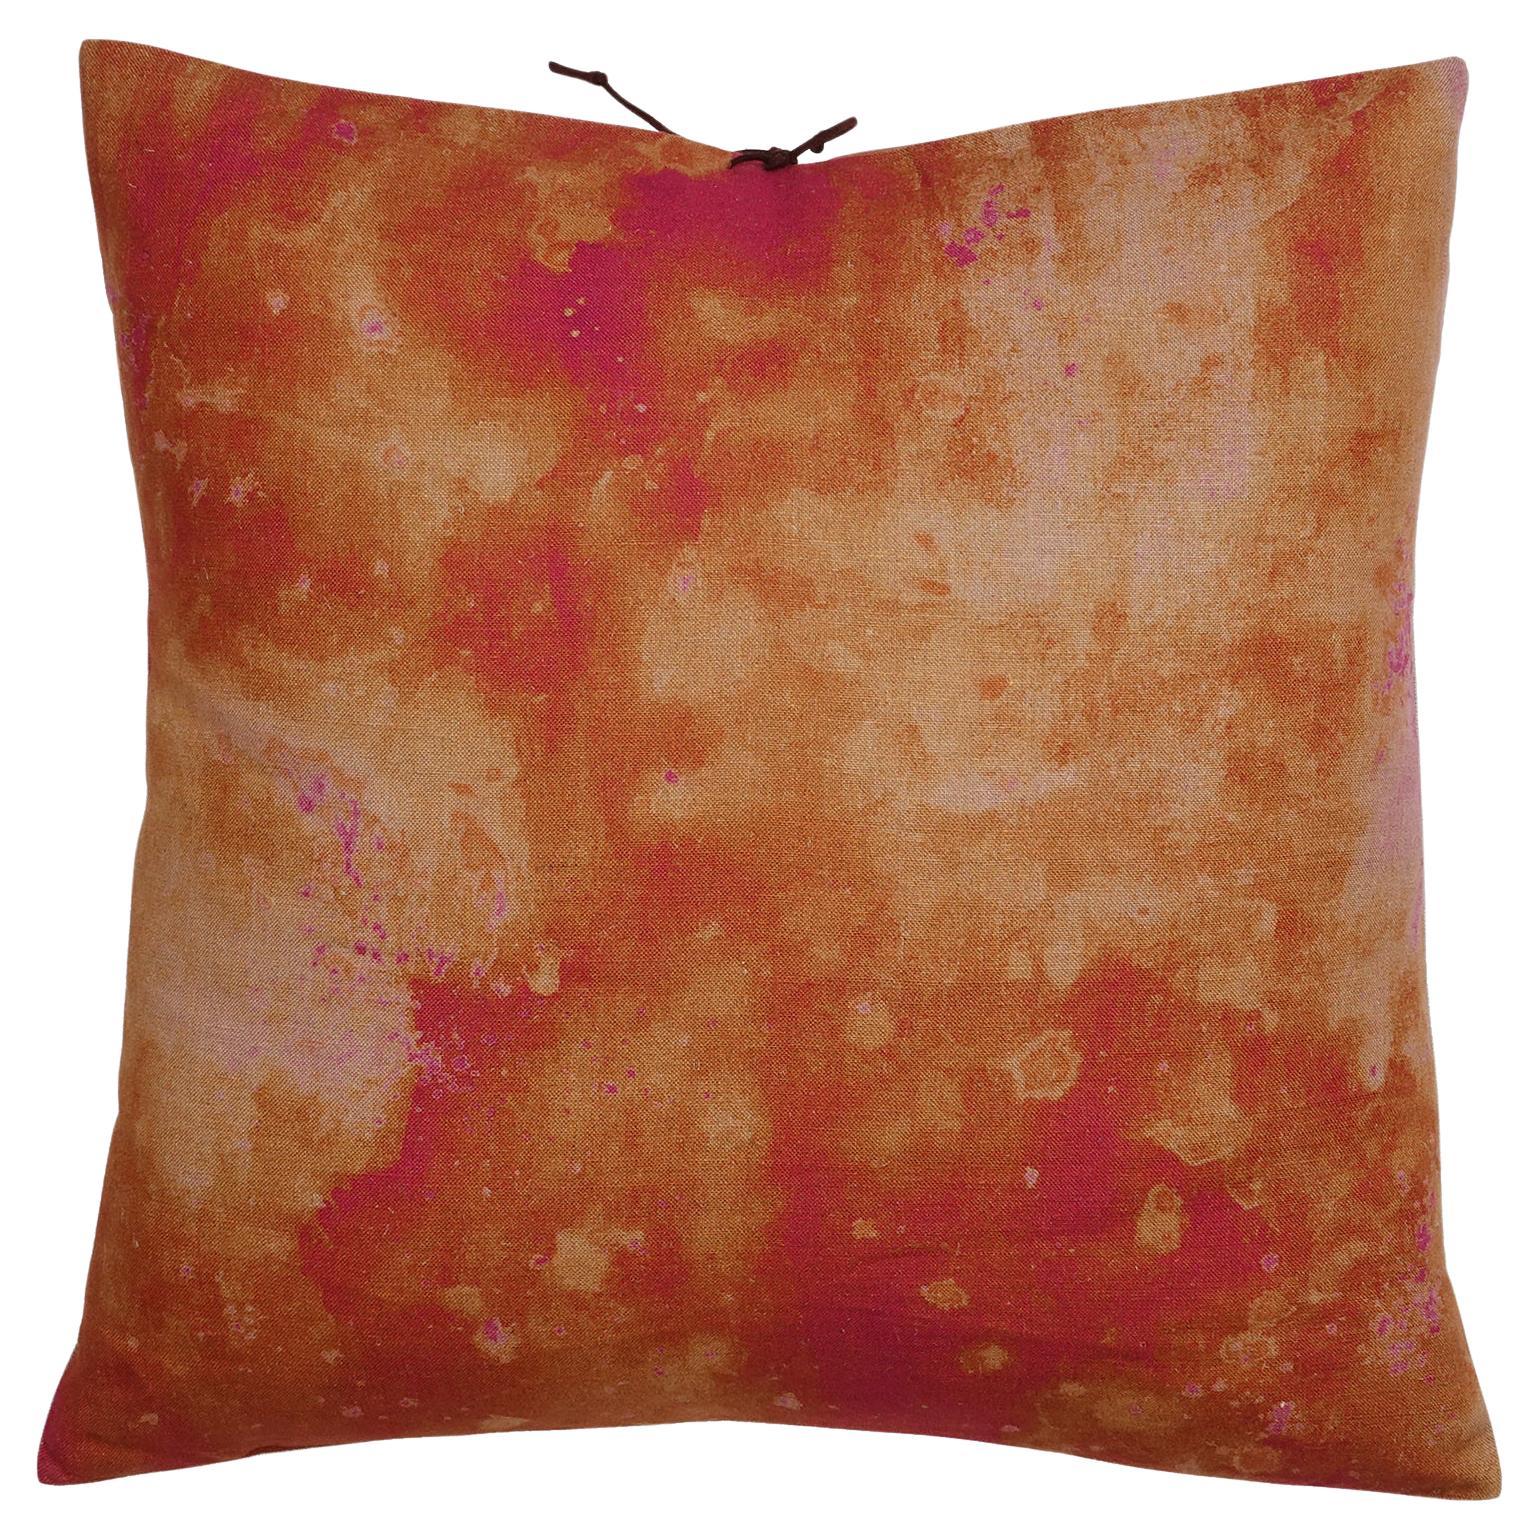 Printed Linen Pillow Cloudy Amber For Sale